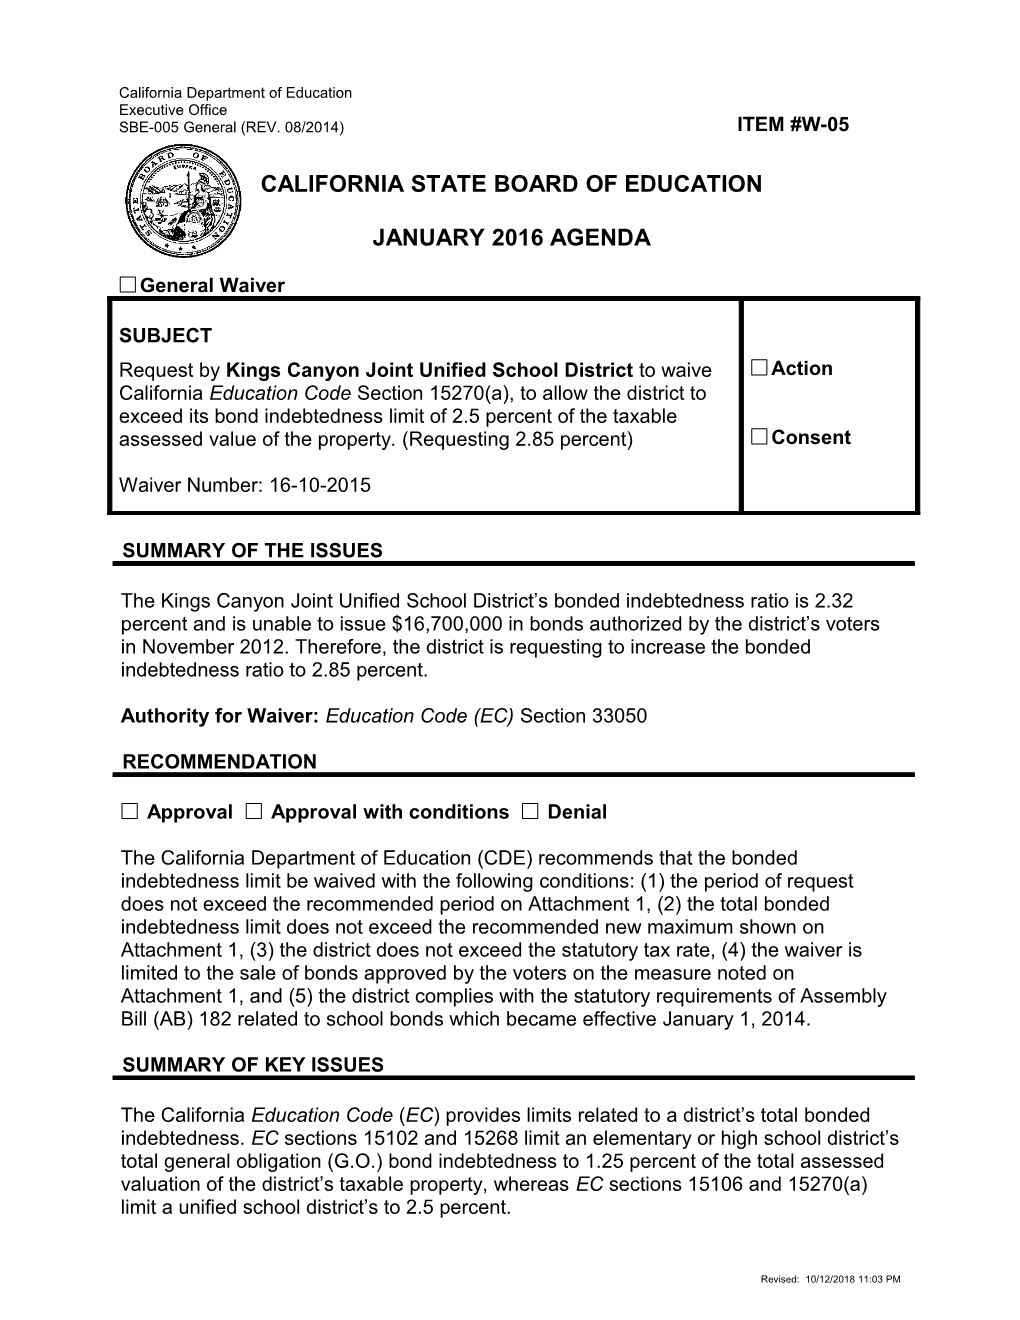 January 2016 Waiver Item W-05 - Meeting Agendas (CA State Board of Education)